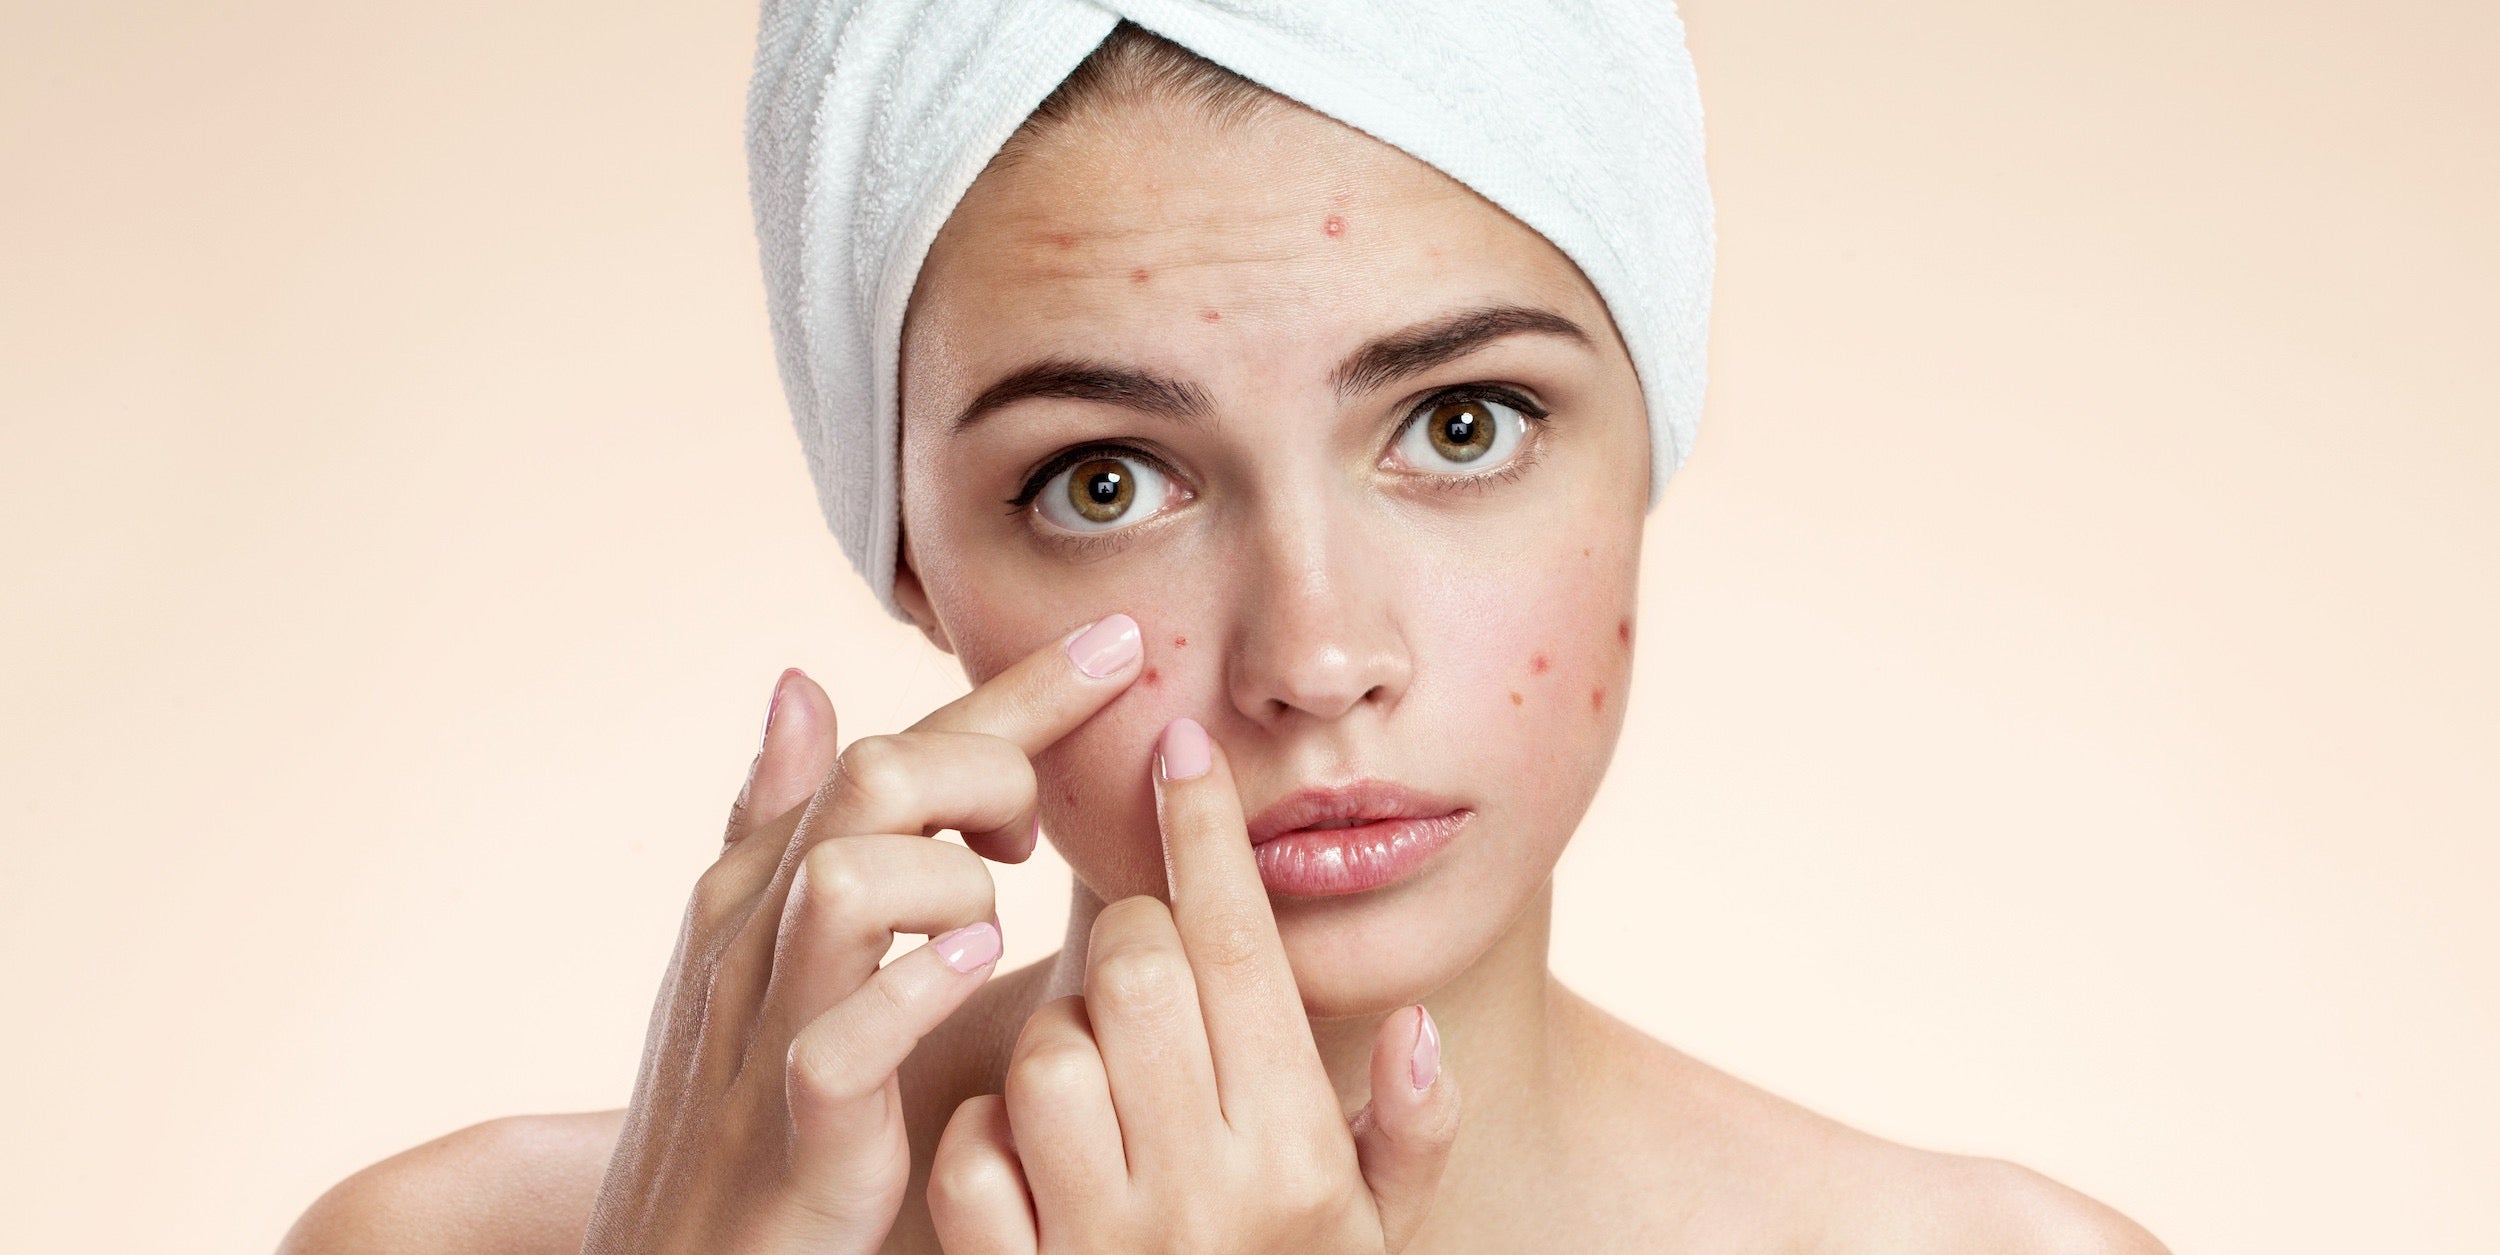 Woman wearing a towel with acne.